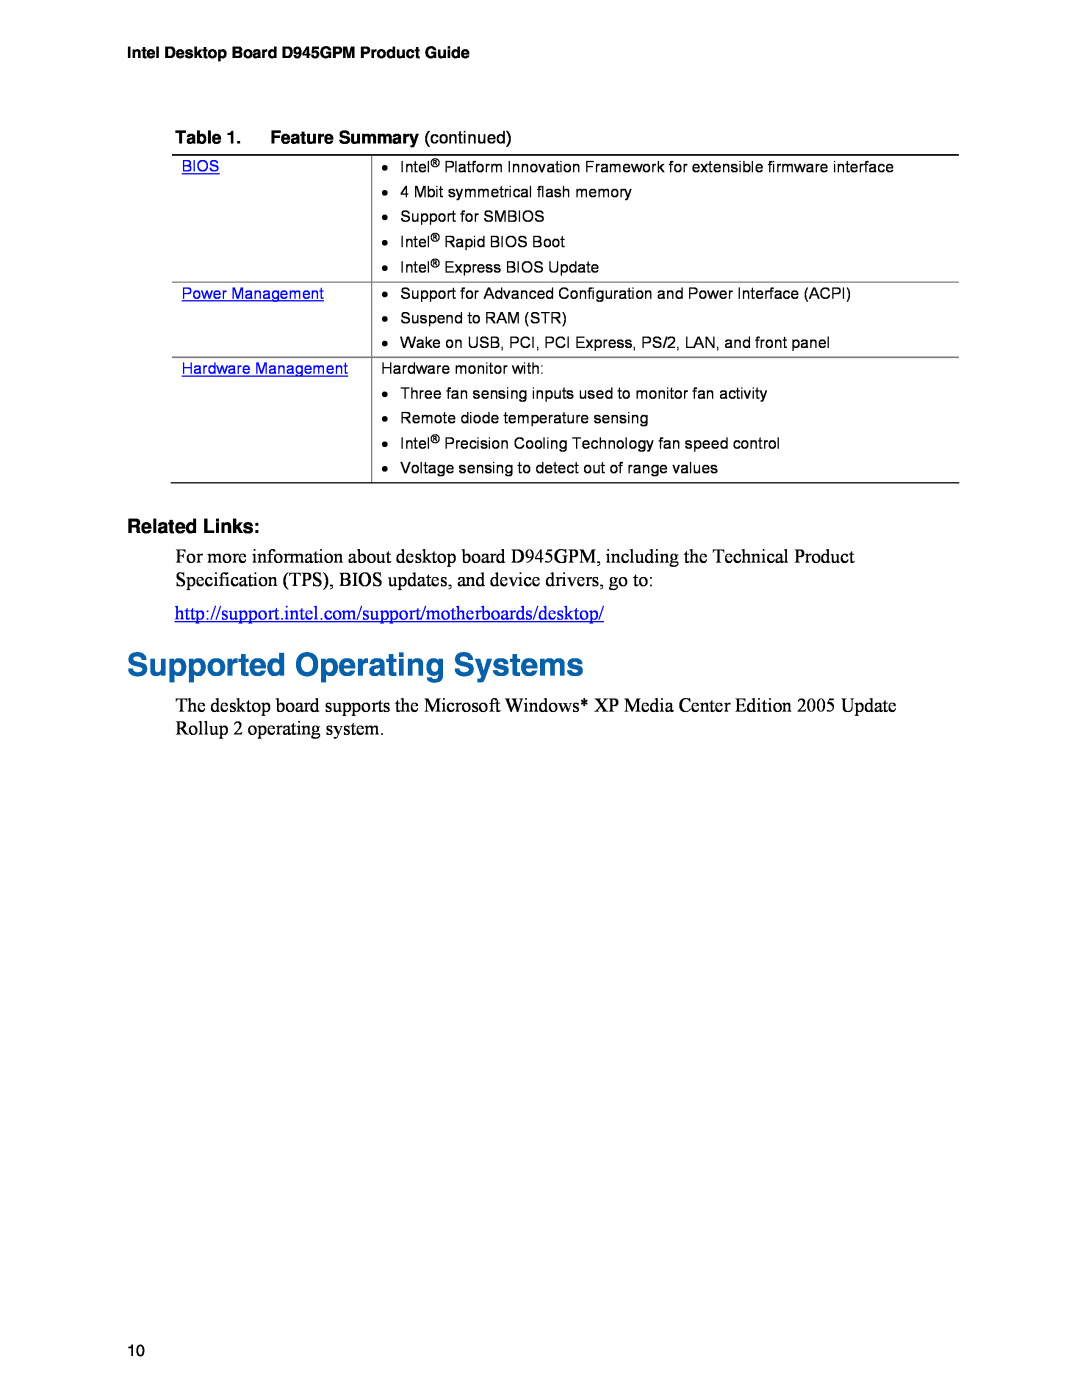 Intel D945GPM manual Supported Operating Systems, Related Links, http//support.intel.com/support/motherboards/desktop 